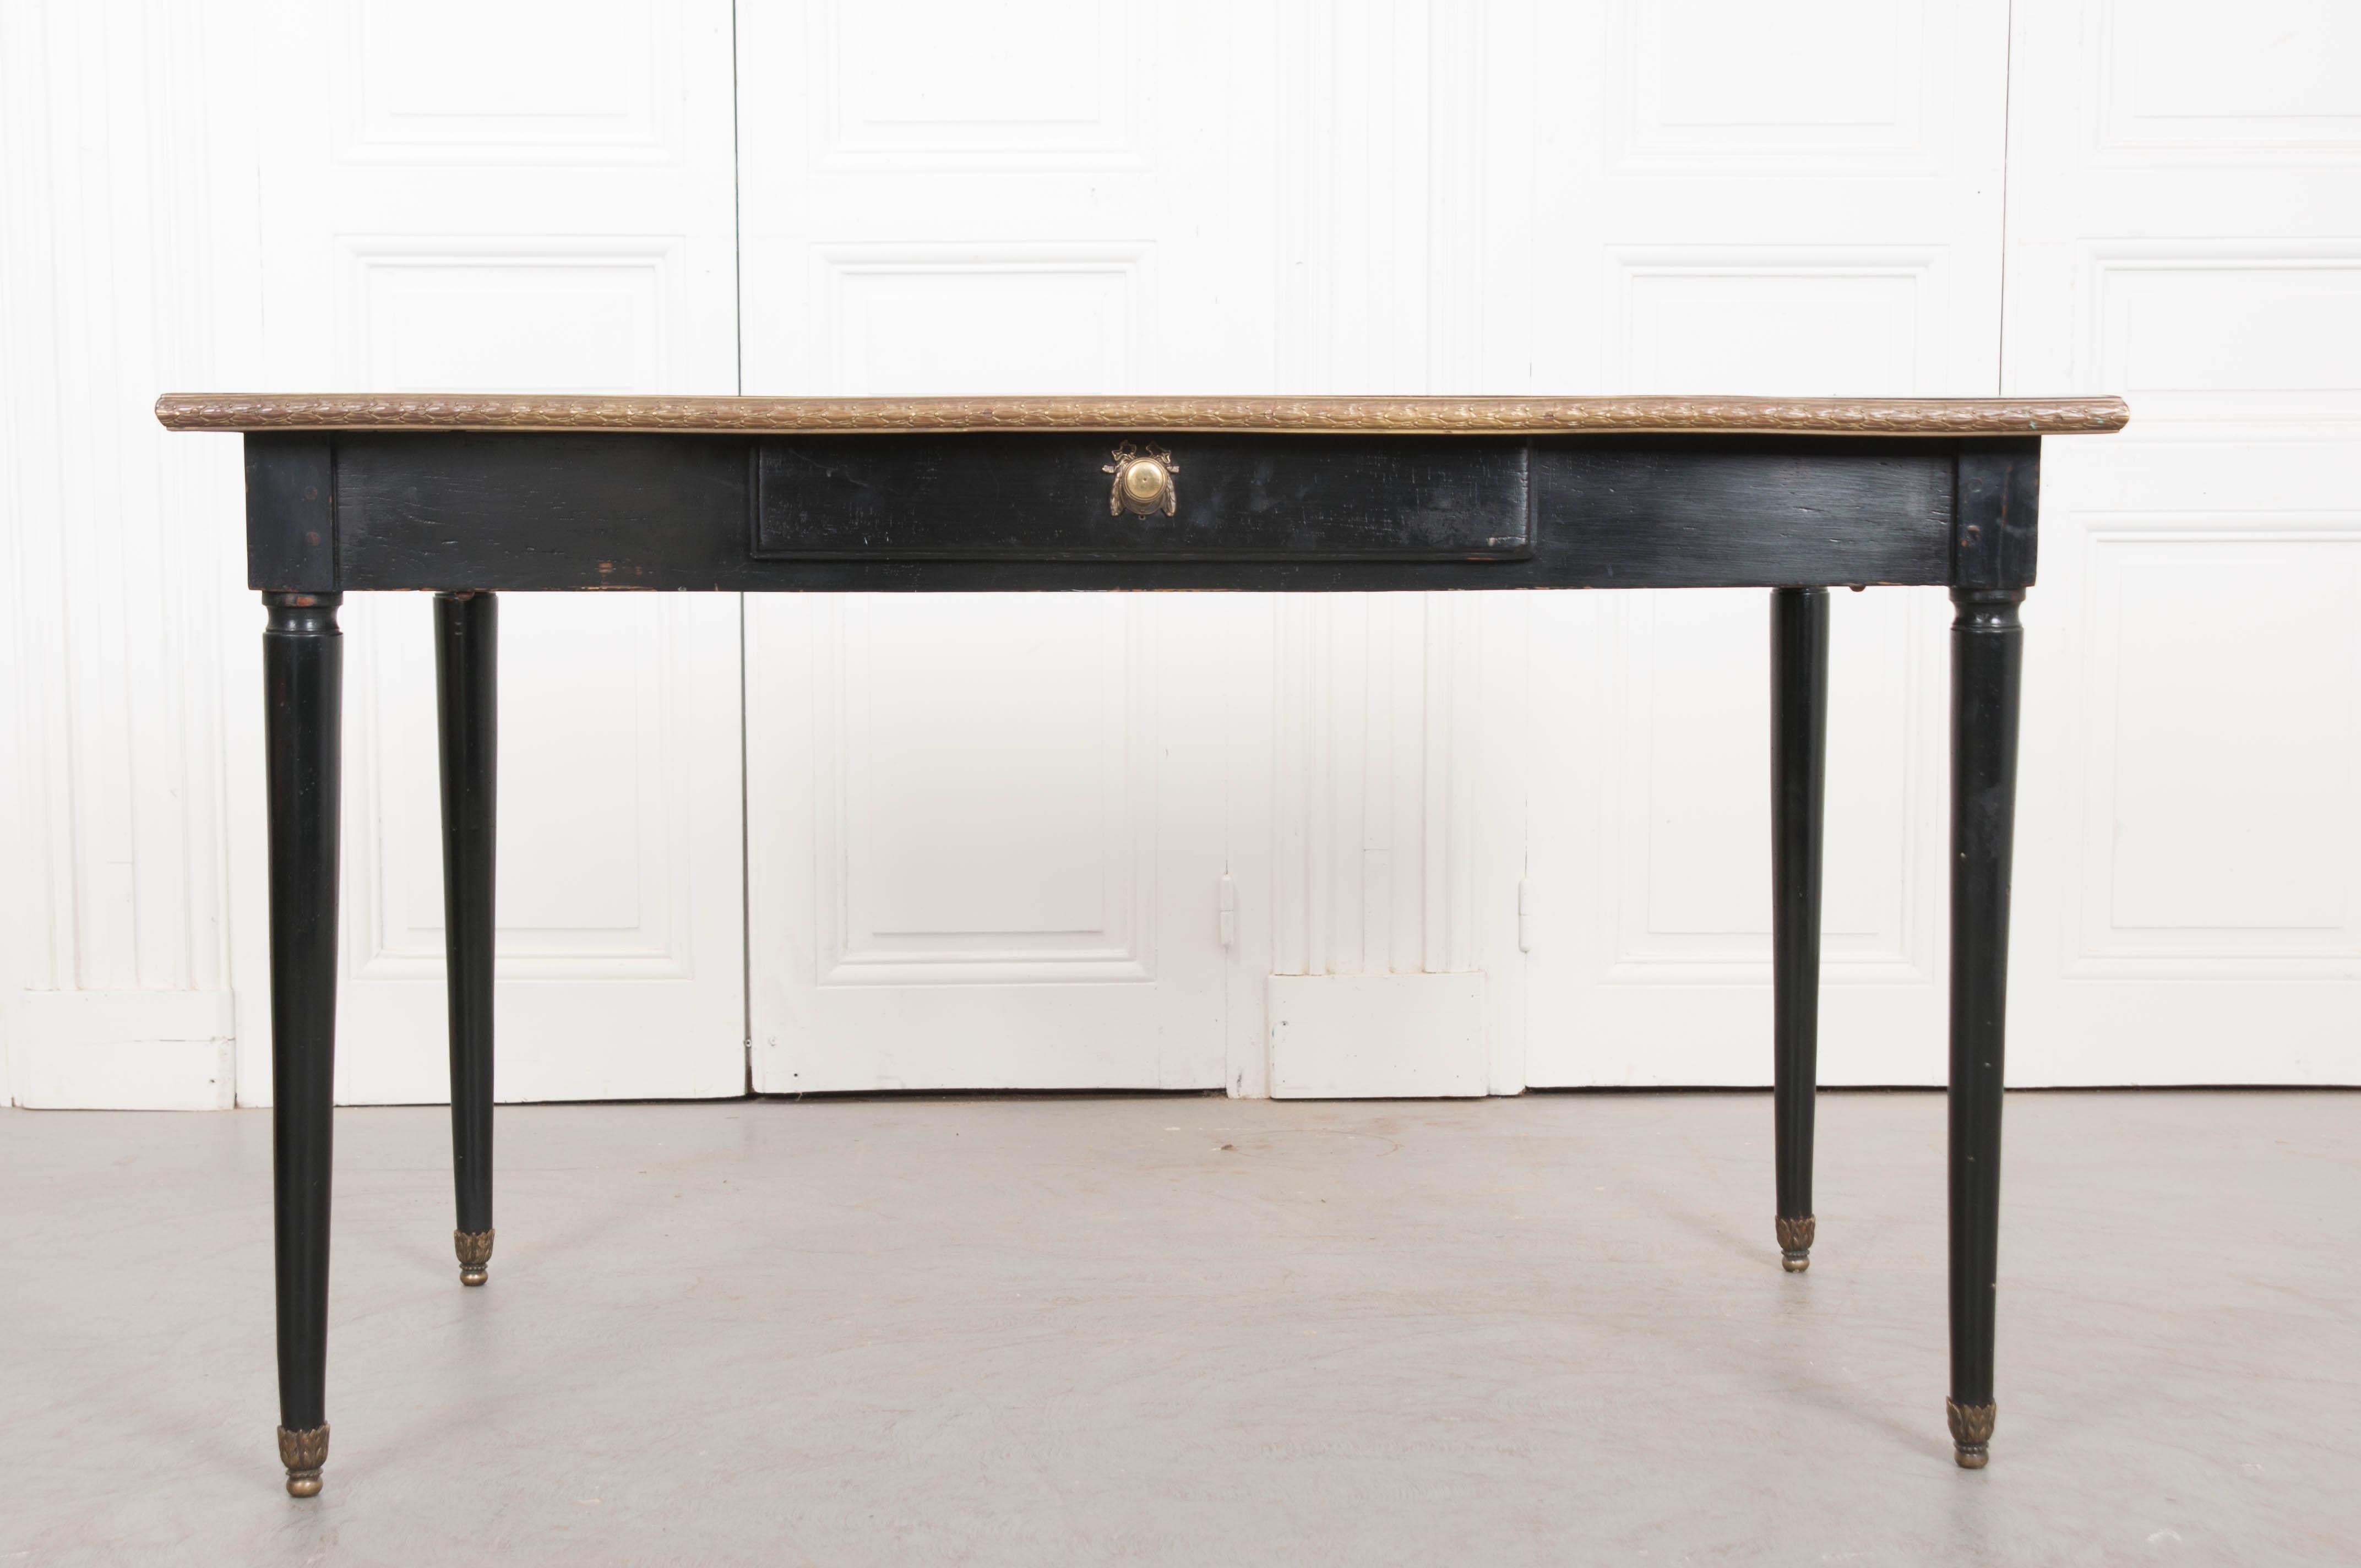 A transitionally styled ebonized writing table from 1880's, France. This refined desk is topped in a fabulous piece of peach-toned, natural colored leather. It is trimmed with gold tooling and embellished with a central diamond-shaped gold-tooled